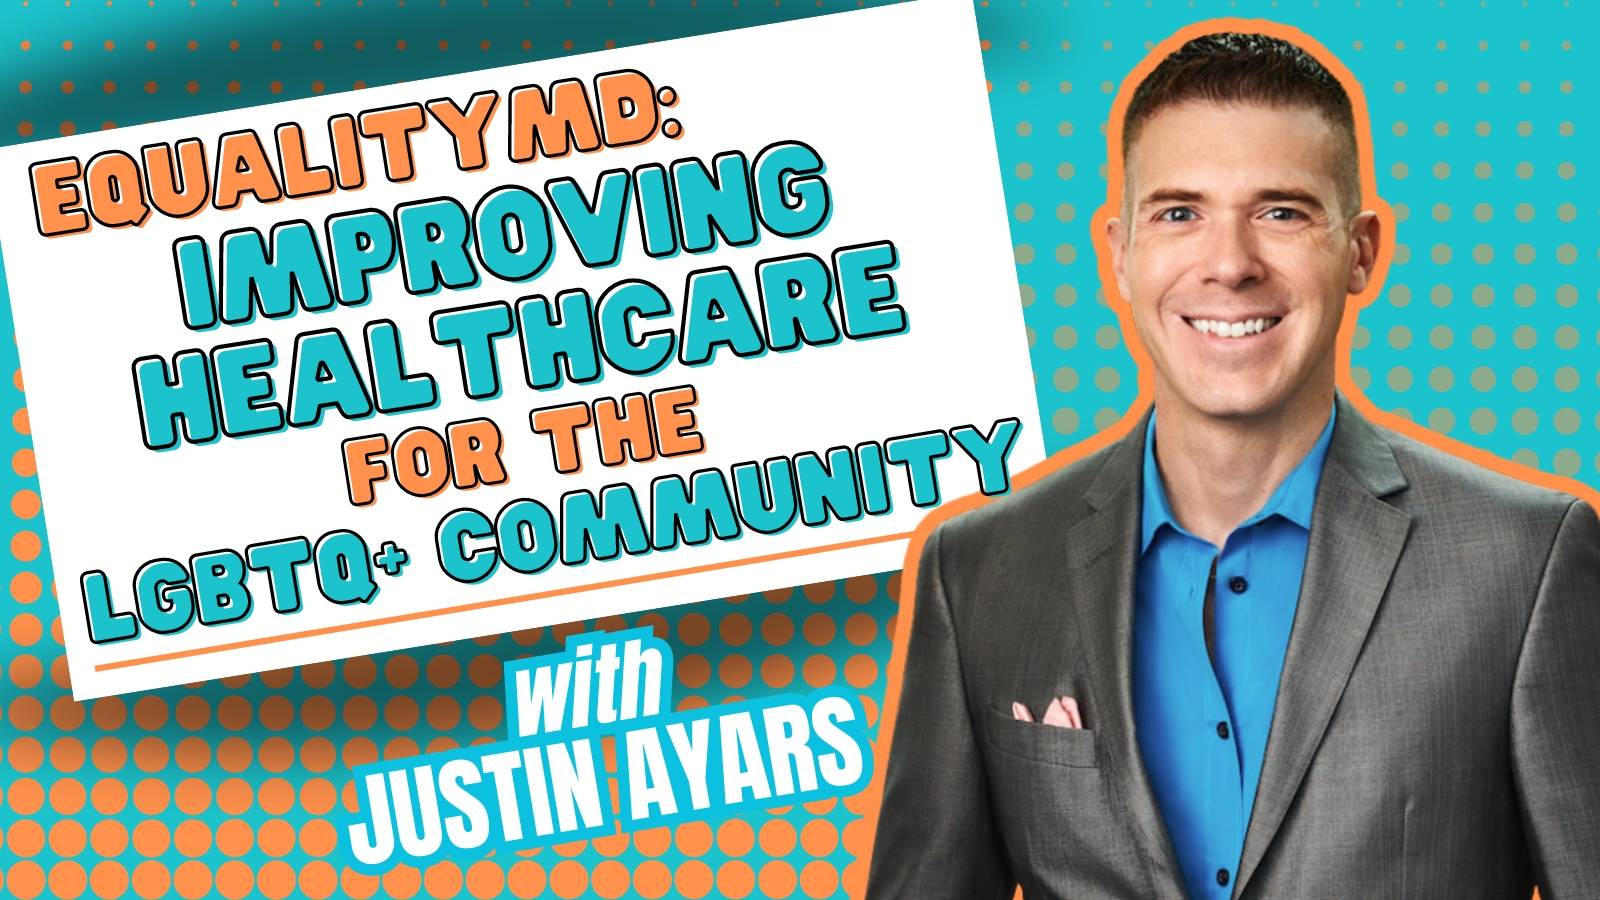 EqualityMD: Improving Healthcare for the LGBTQ+ Community with Justin Ayars